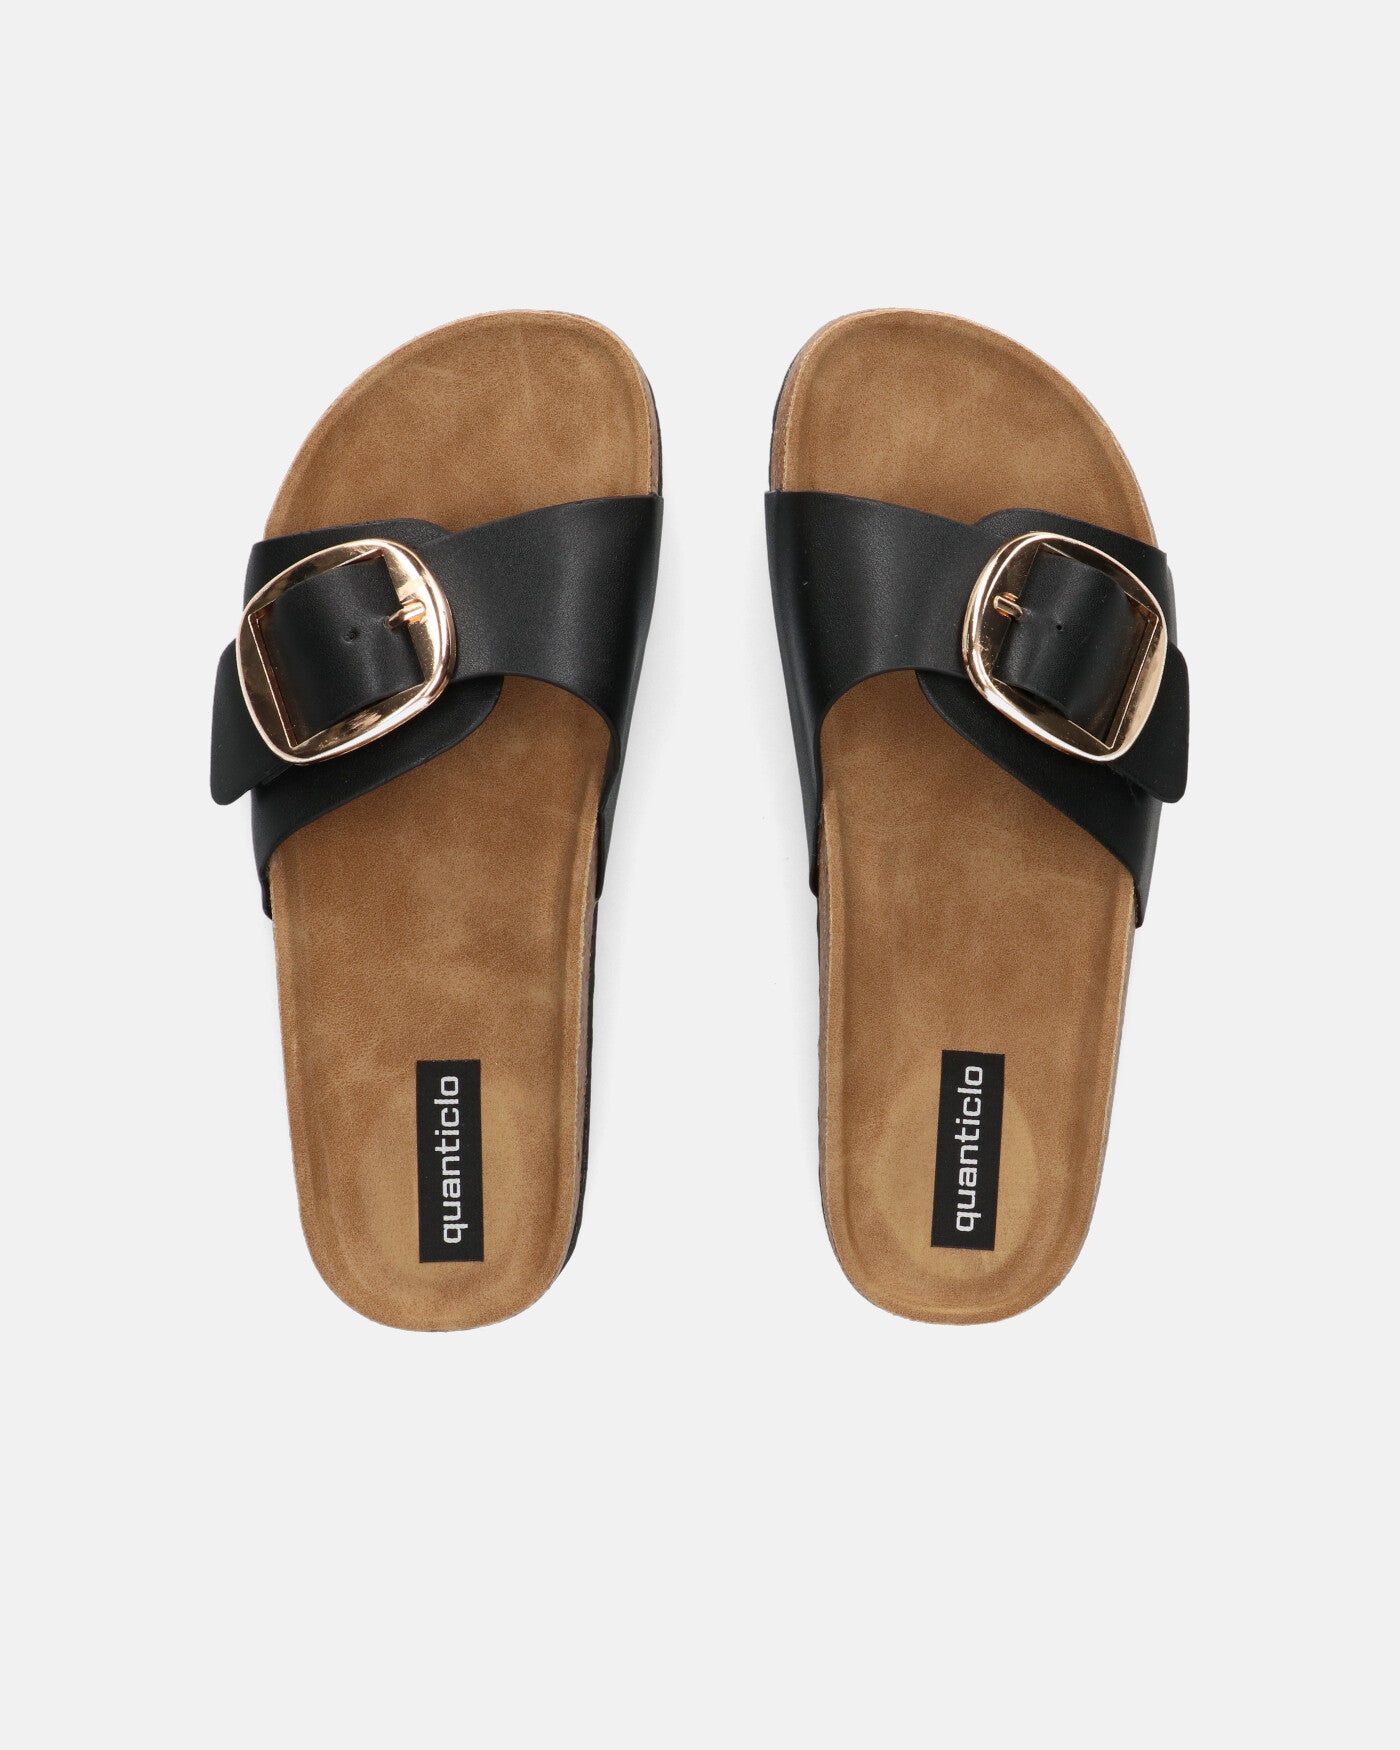 LENA - sandals with cork sole and black band